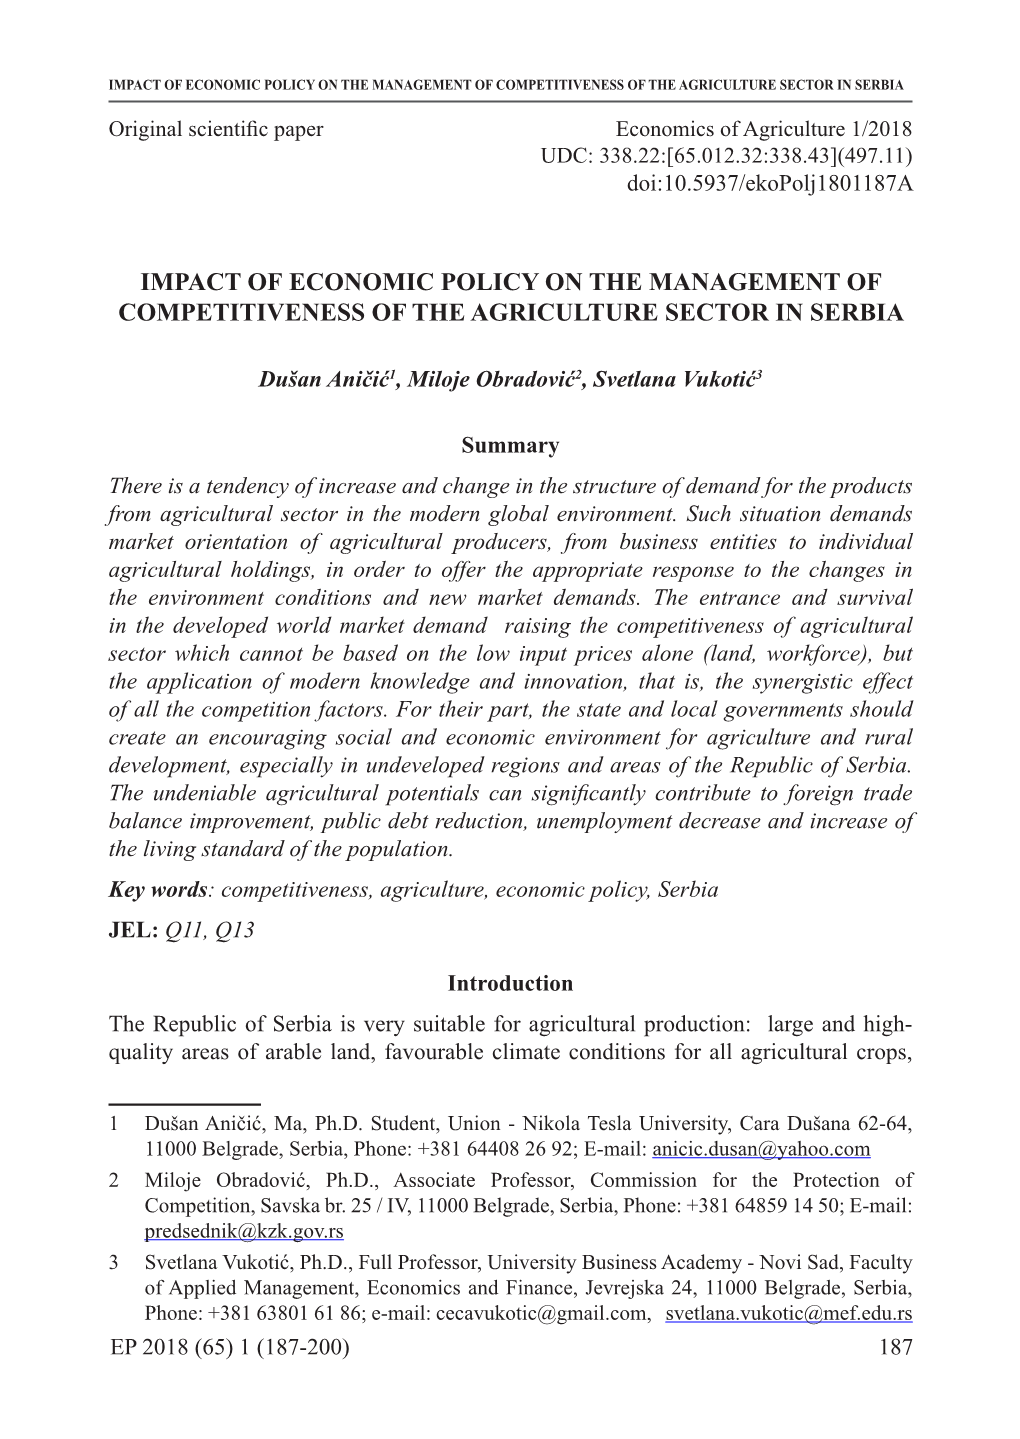 Impact of Economic Policy on the Management of Competitiveness of the Agriculture Sector in Serbia